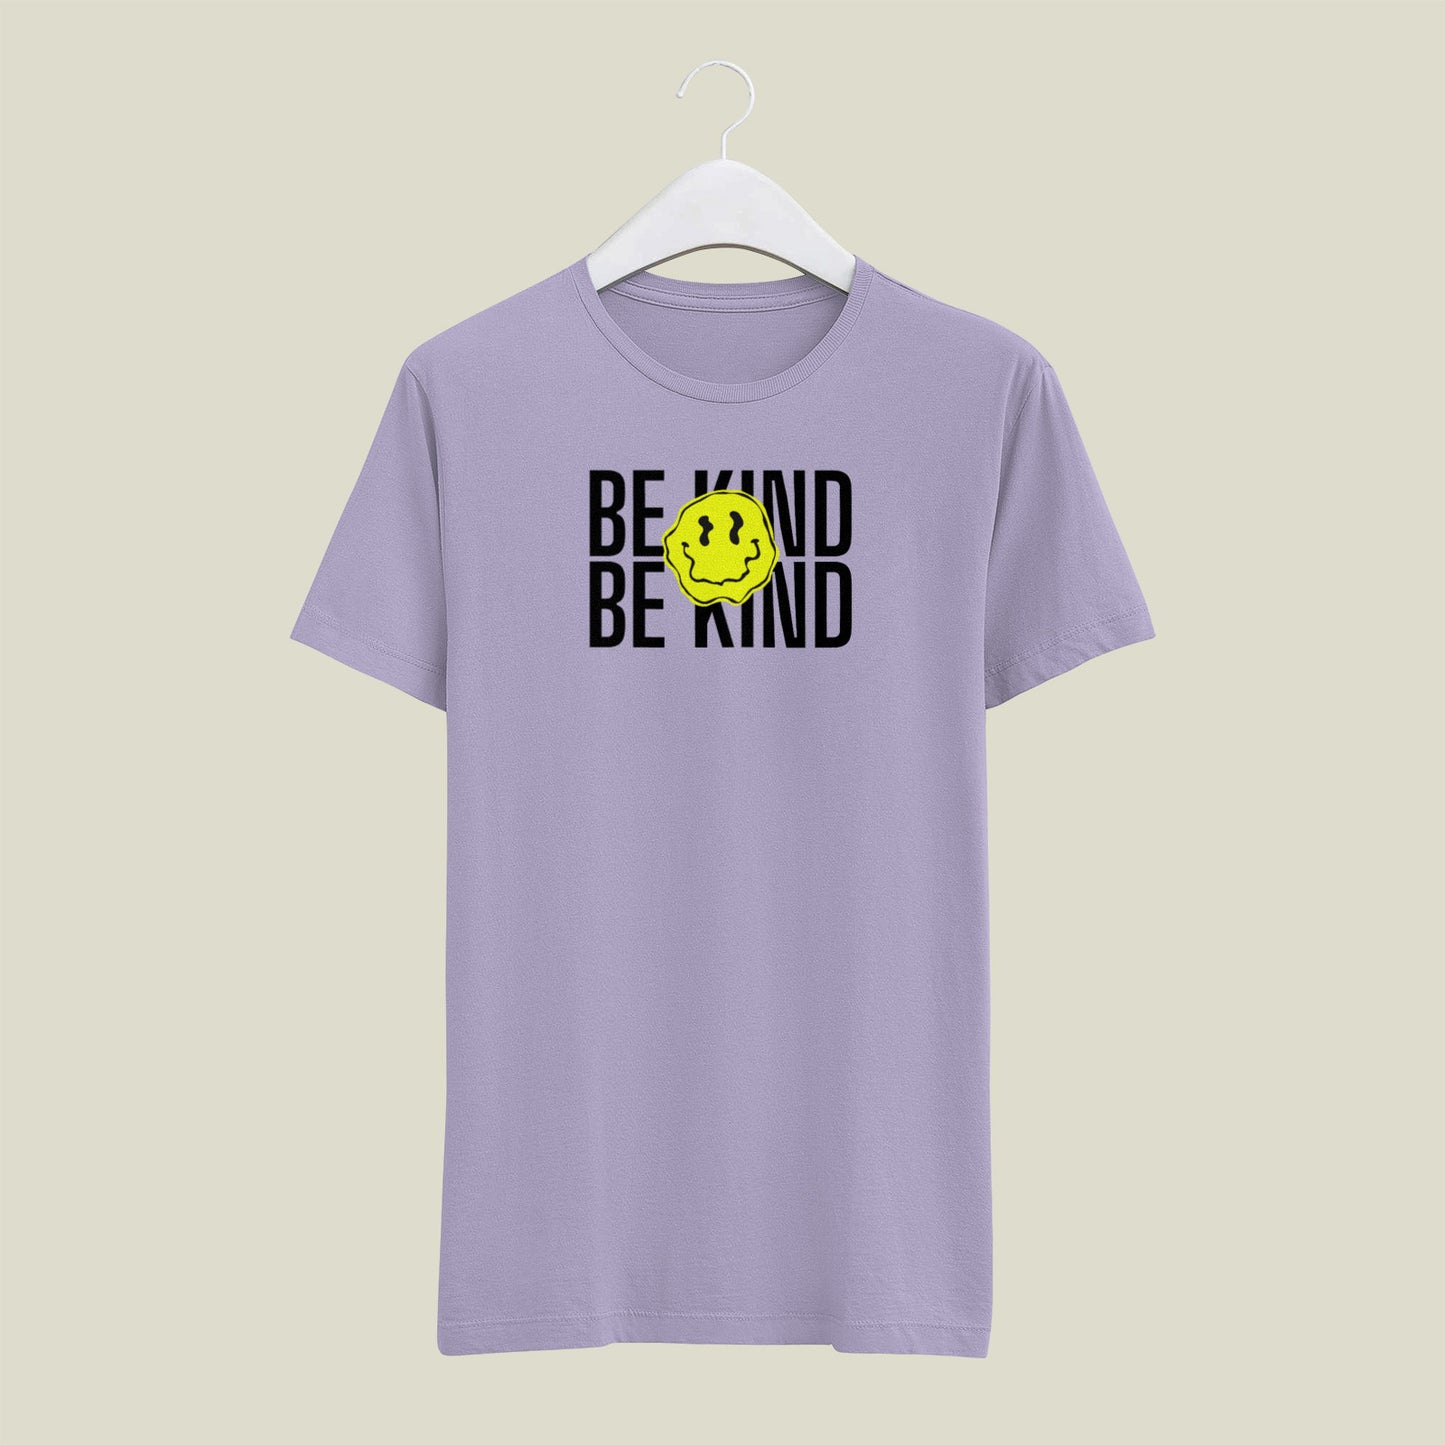 BE KIND T-shirt